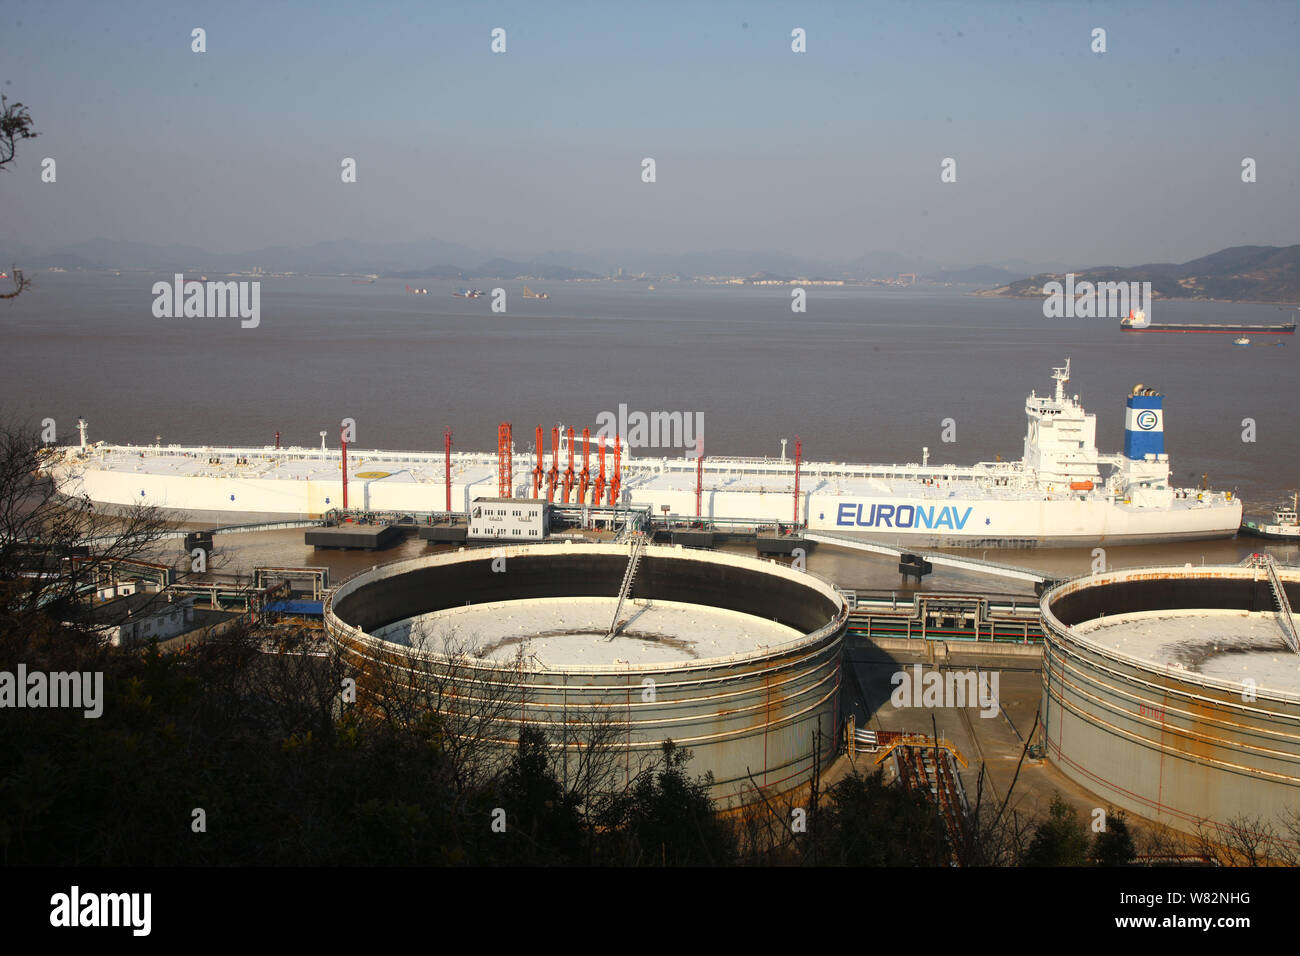 The supertanker TI Europe is seen at a berth in Daxie port zone of Ningbo-Zhoushan Port in Ningbo city, east China's Zhejiang Province, 13 February 20 Stock Photo